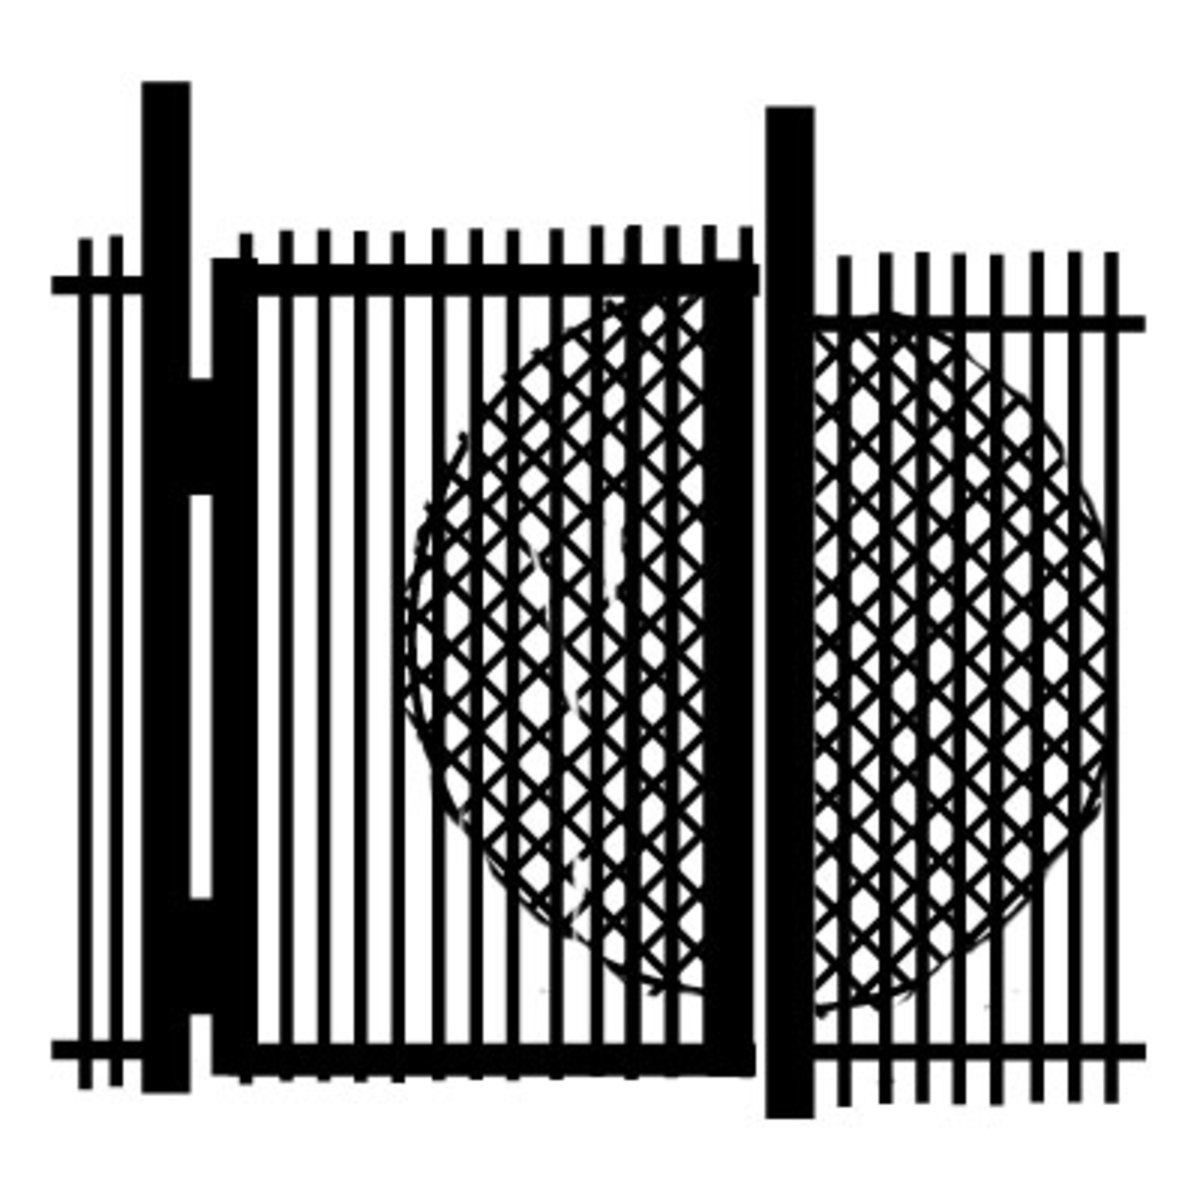 Metal gate with expanded steel mesh to guard against reach-through unauthorized entry.  